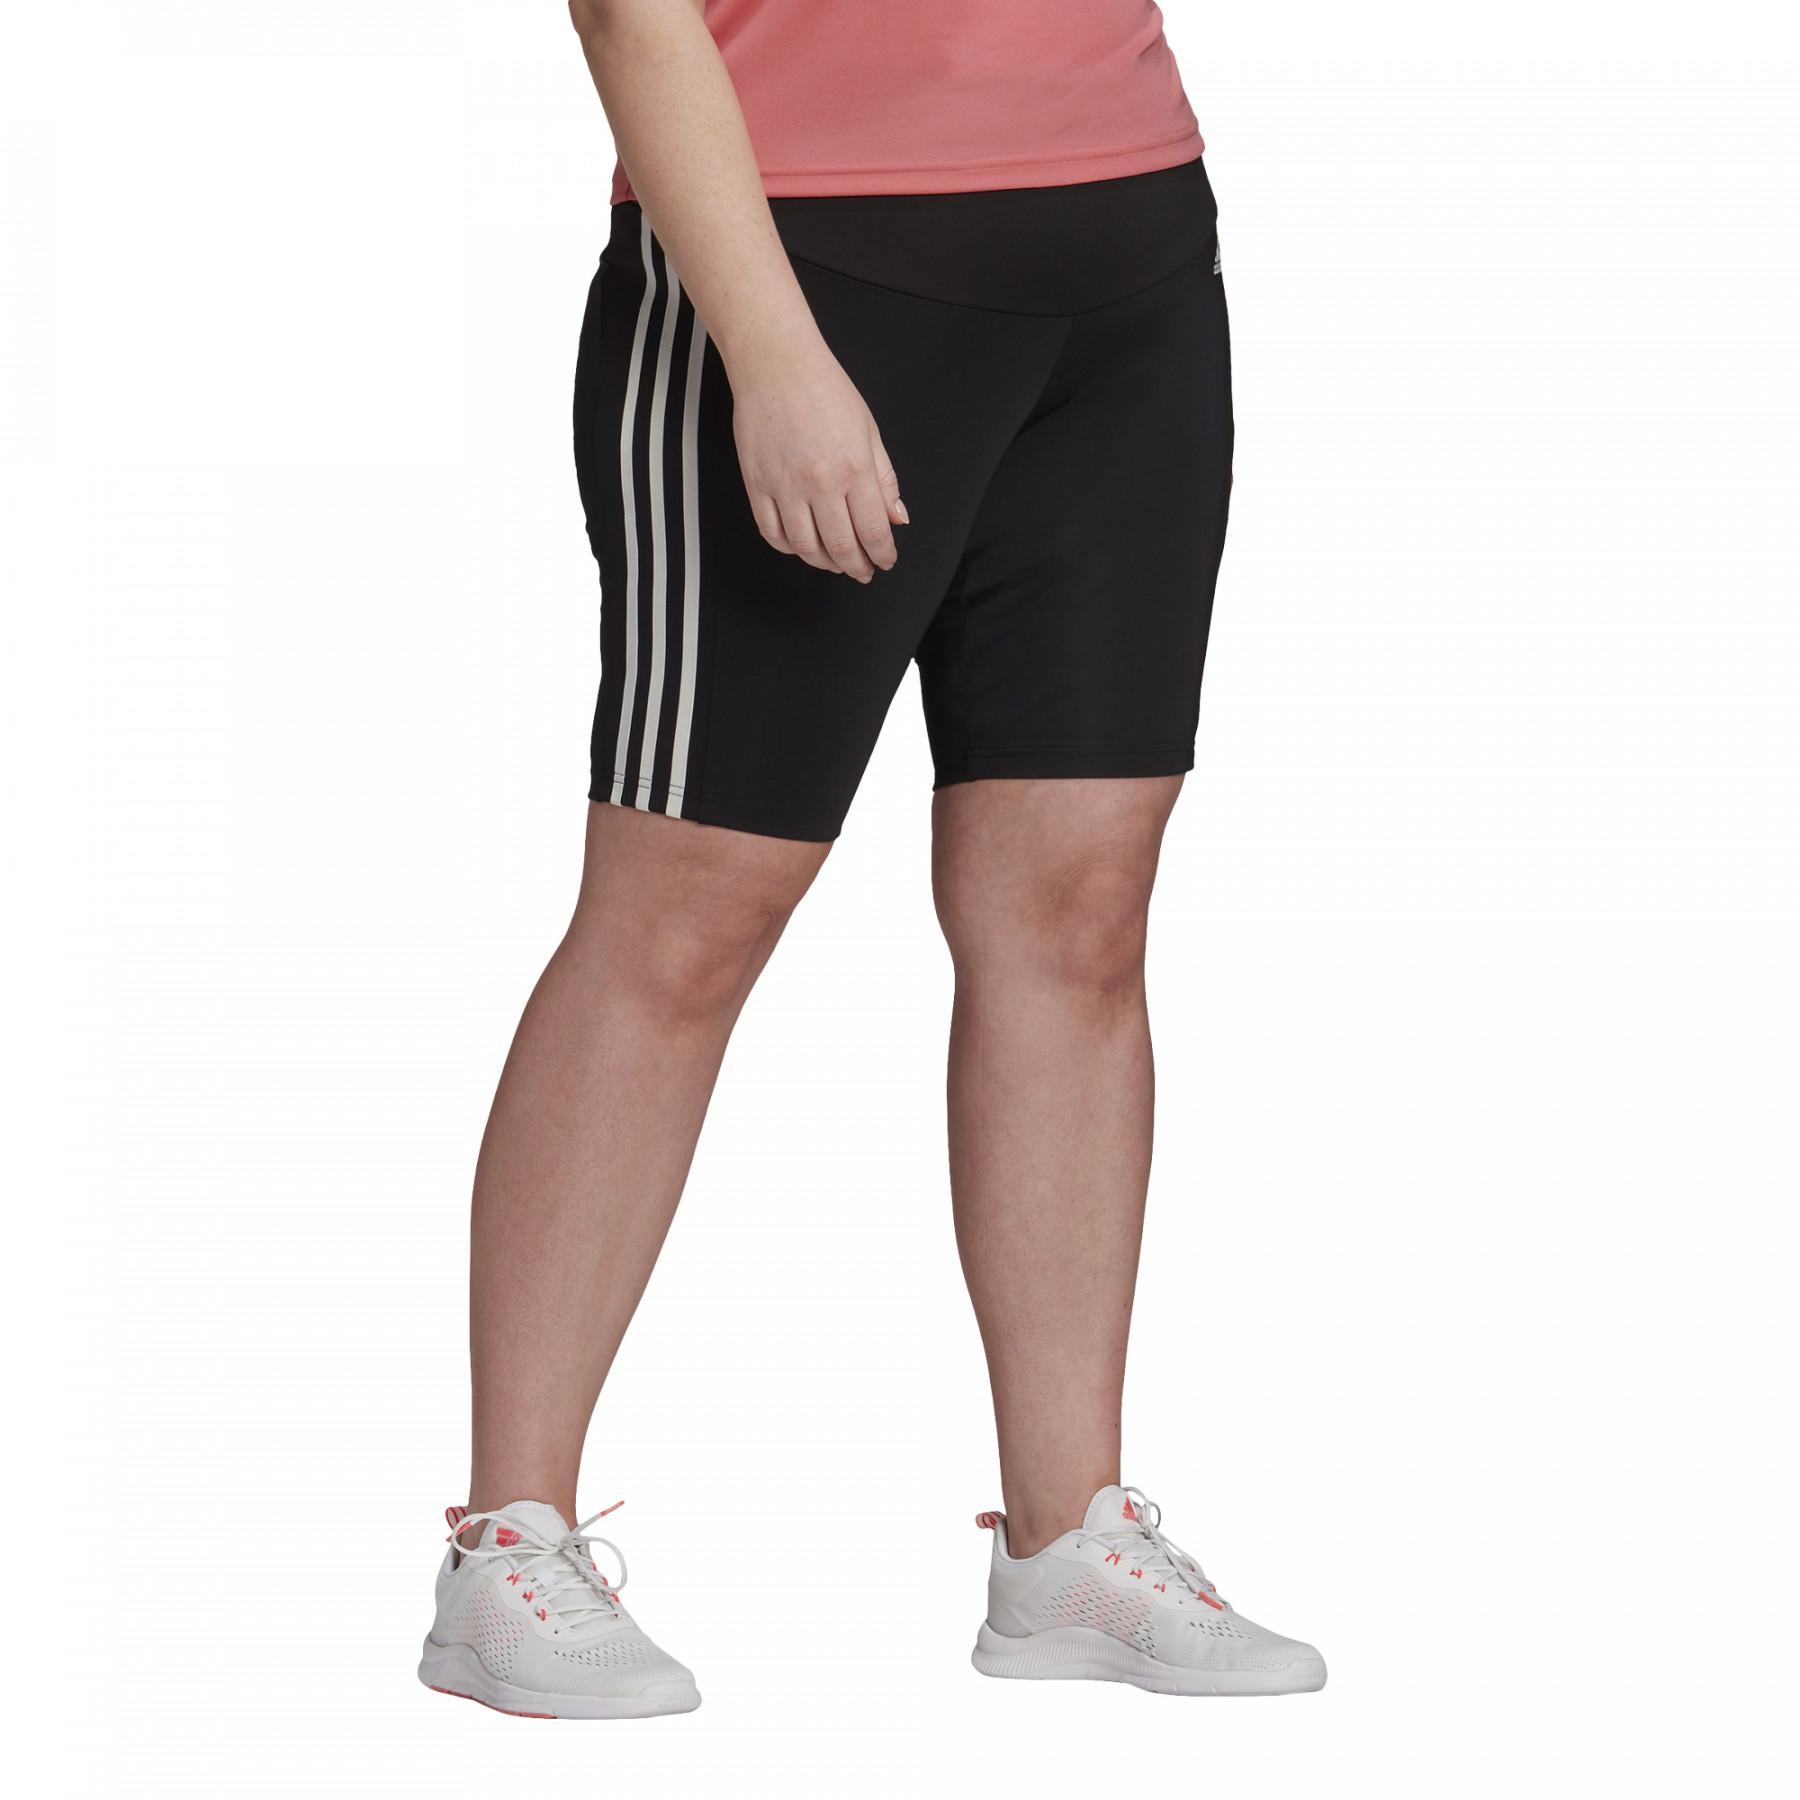 Ciclista donna adidas High Riseport Grande Taille